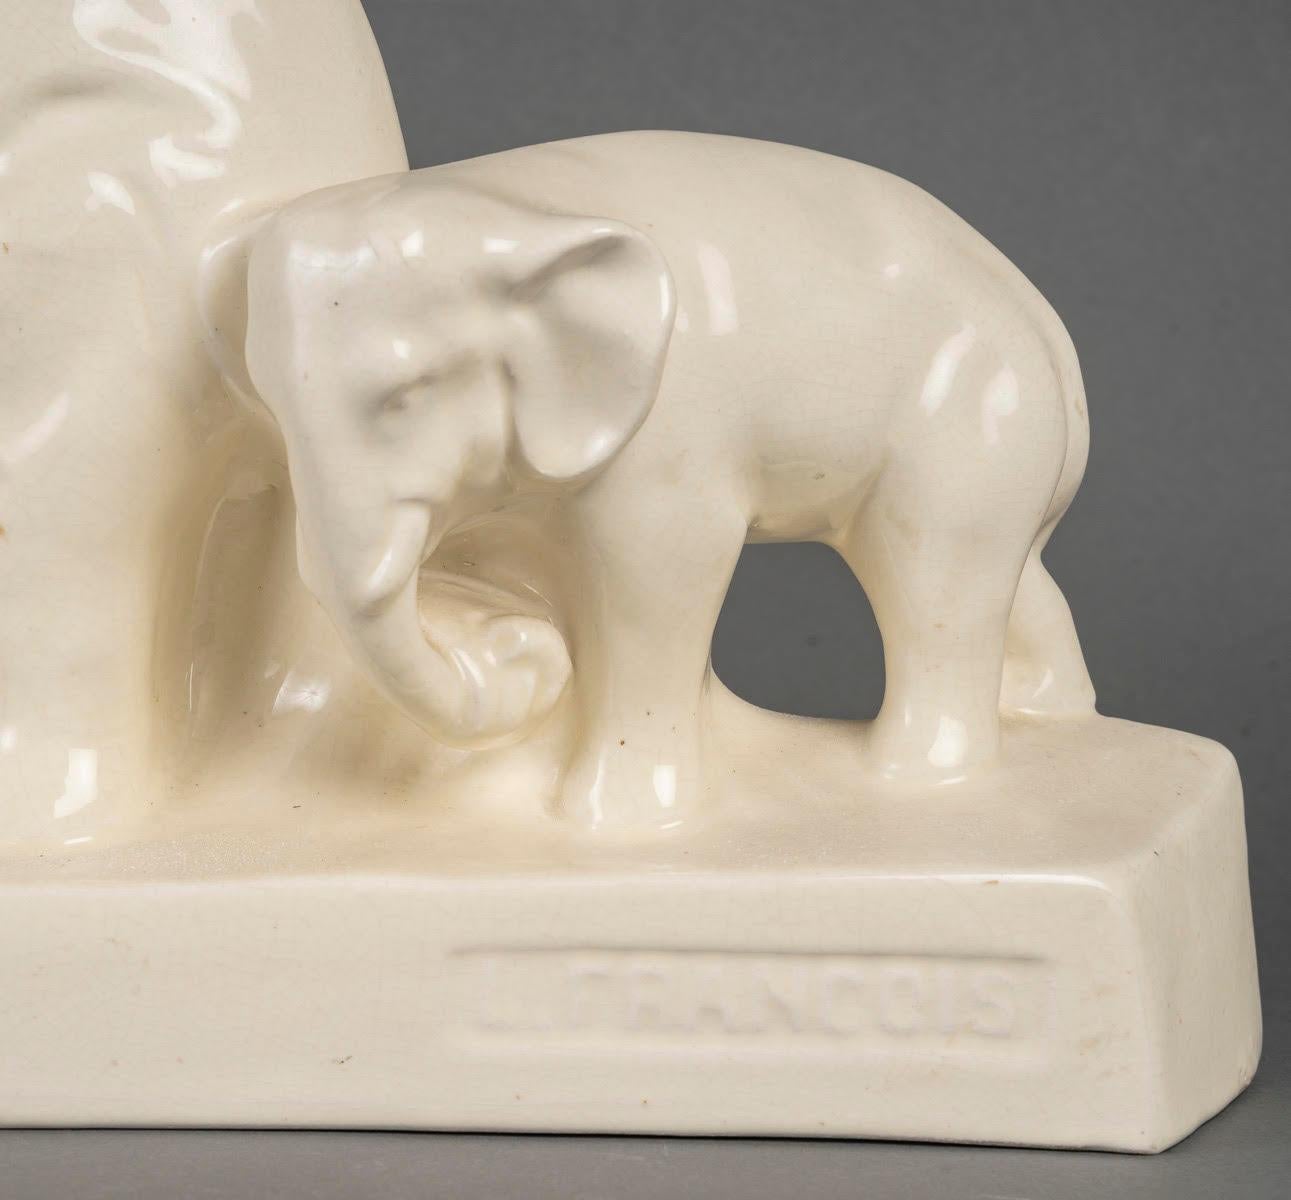 Cracked earthenware sculpture, signed LEFRANCOIS, the mother elephant and her calf, circa 1930.

An Art Deco period cracked earthenware sculpture, 1930, signed LEFRANCOIS, representing the mother elephant and her calf.
H: 30cm, W: 38cm, D: 11cm